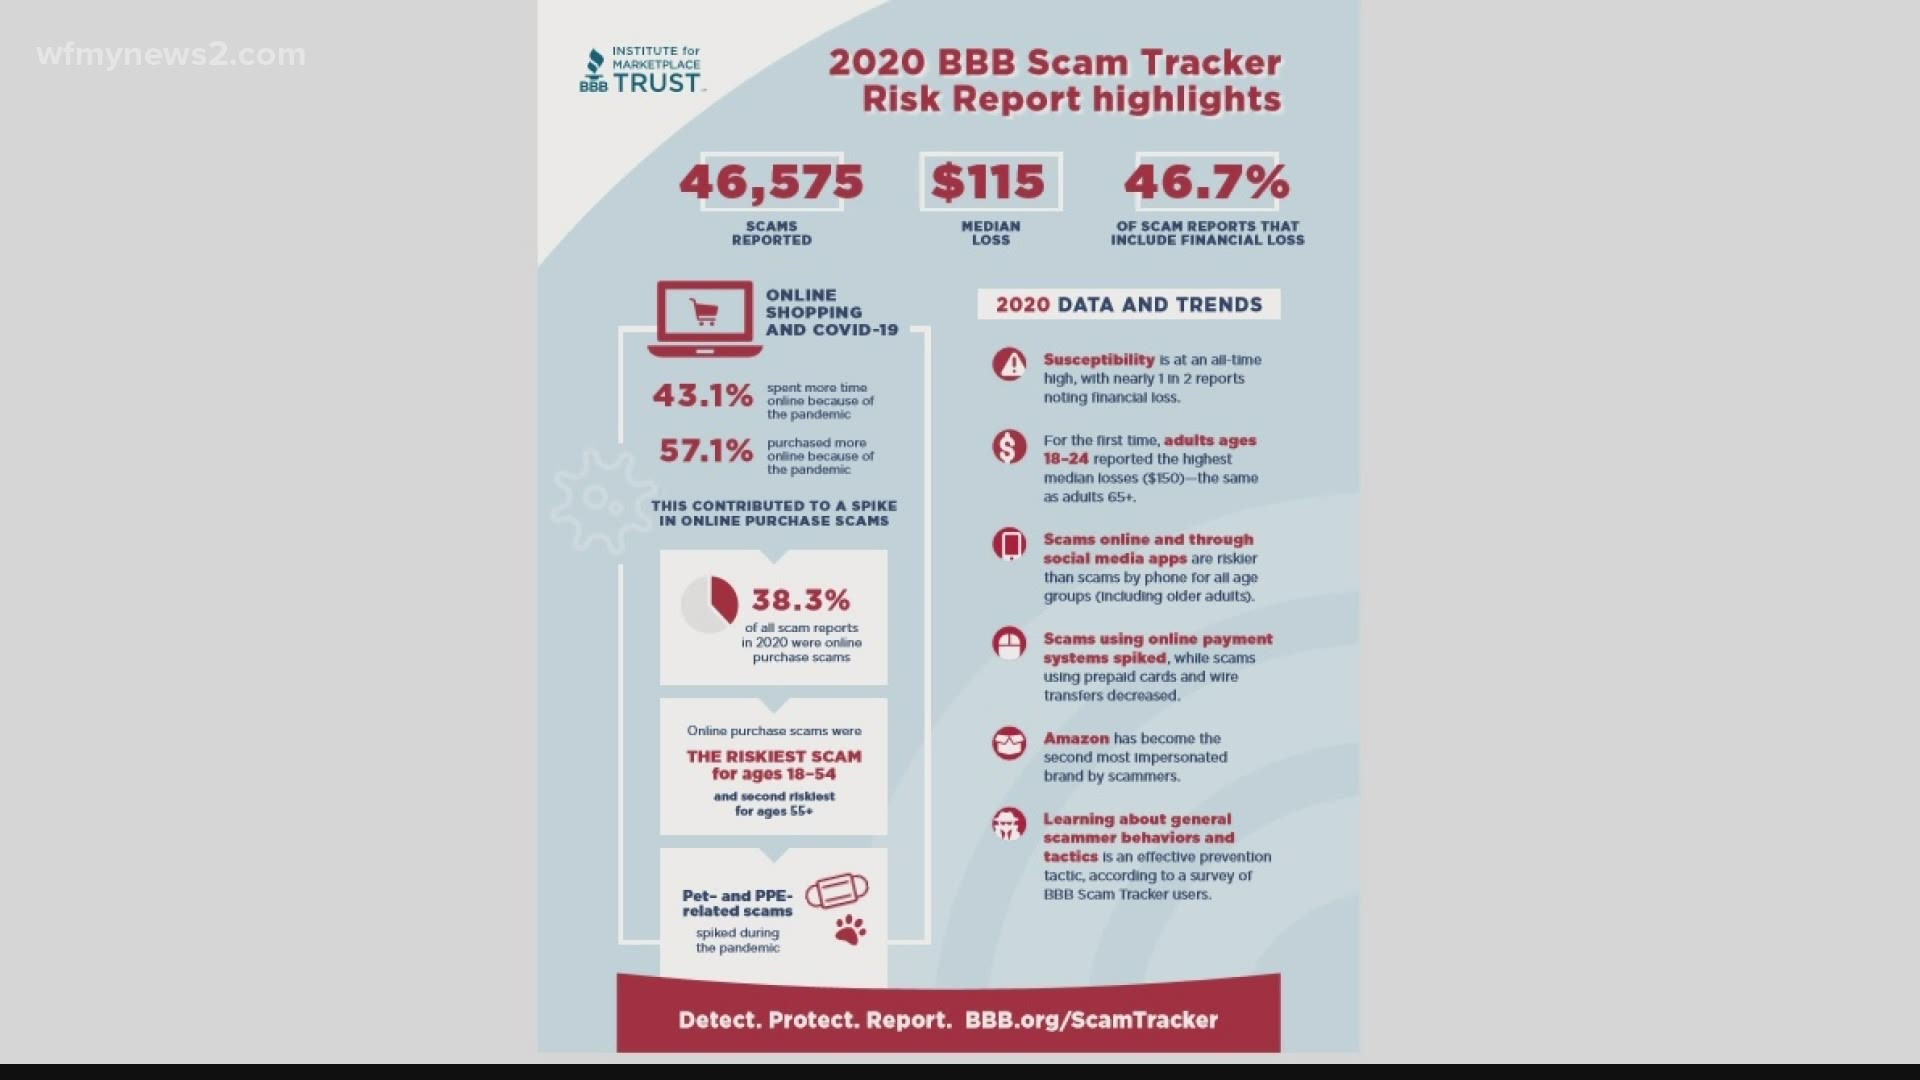 According to the BBB, for the first time, adults ages 18 to 24 reported the highest median losses.